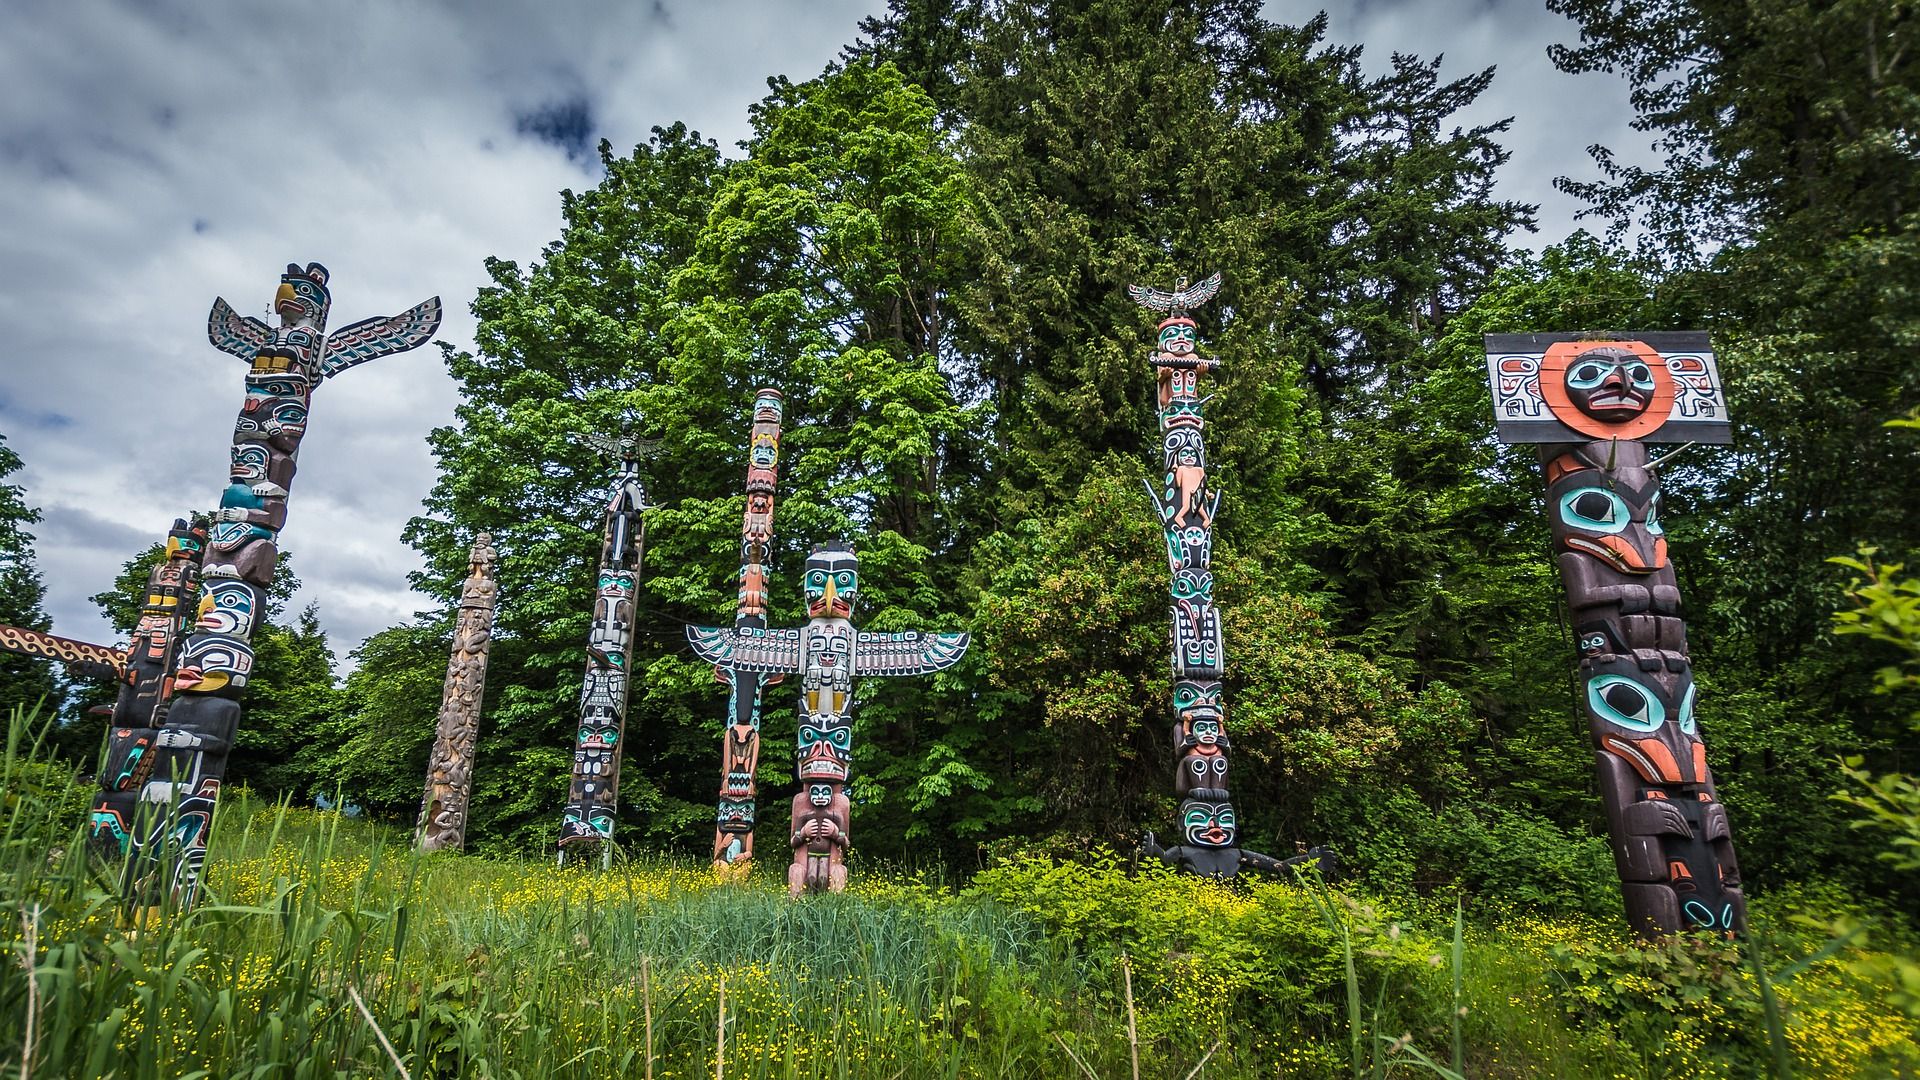 Memorial totem pole to be returned to Nisga'a nation - My Prince George Now